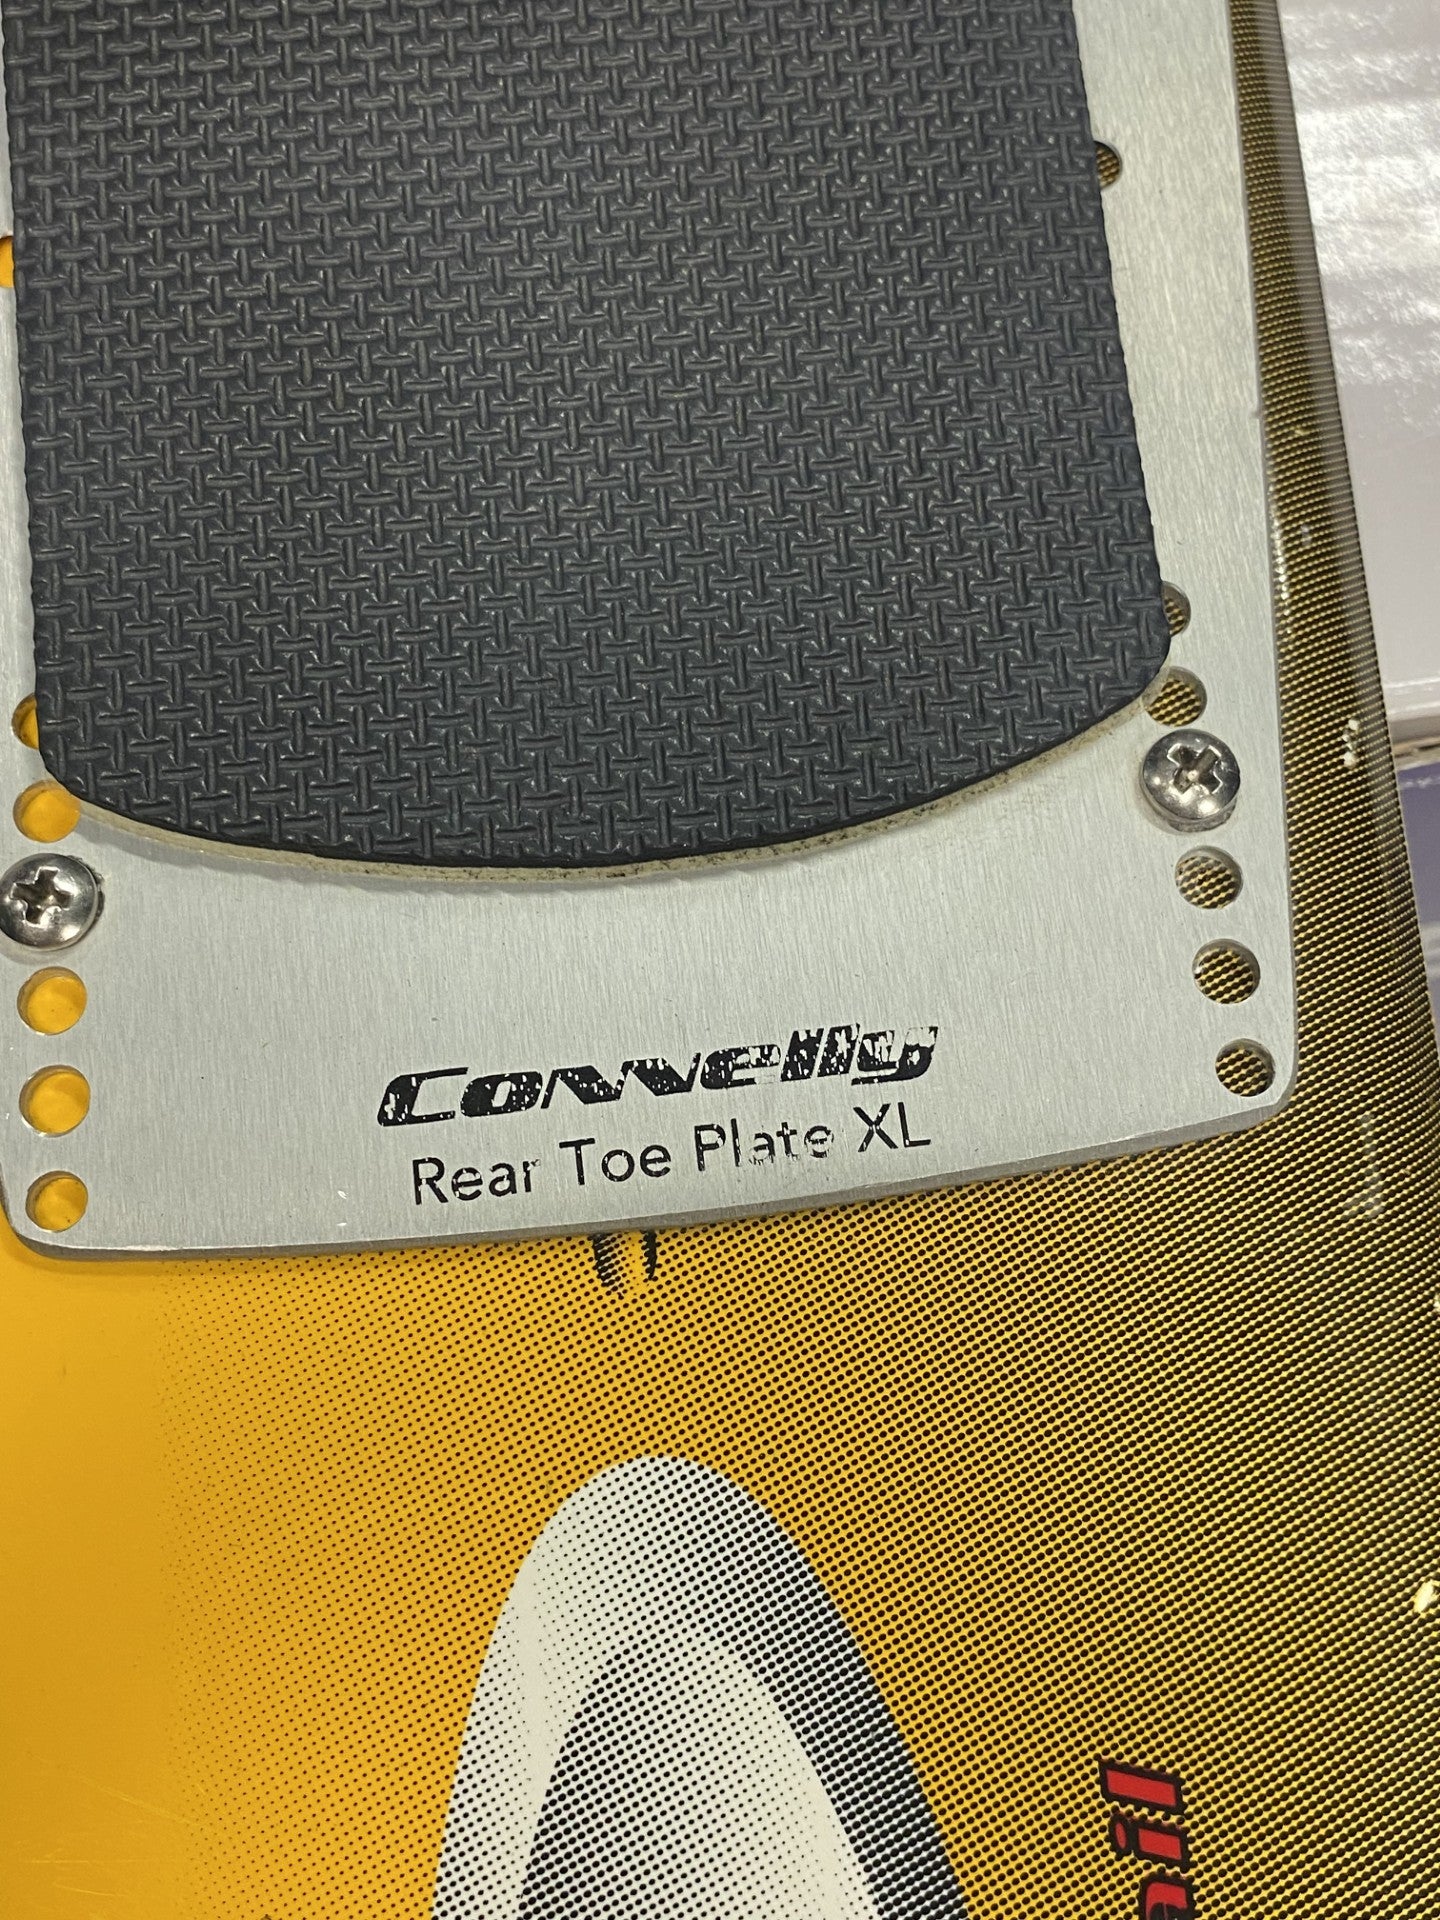 Connelly Revolution Slalom Water Ski Gold Xl Bindings-Sports Replay - Sports Excellence-Sports Replay - Sports Excellence